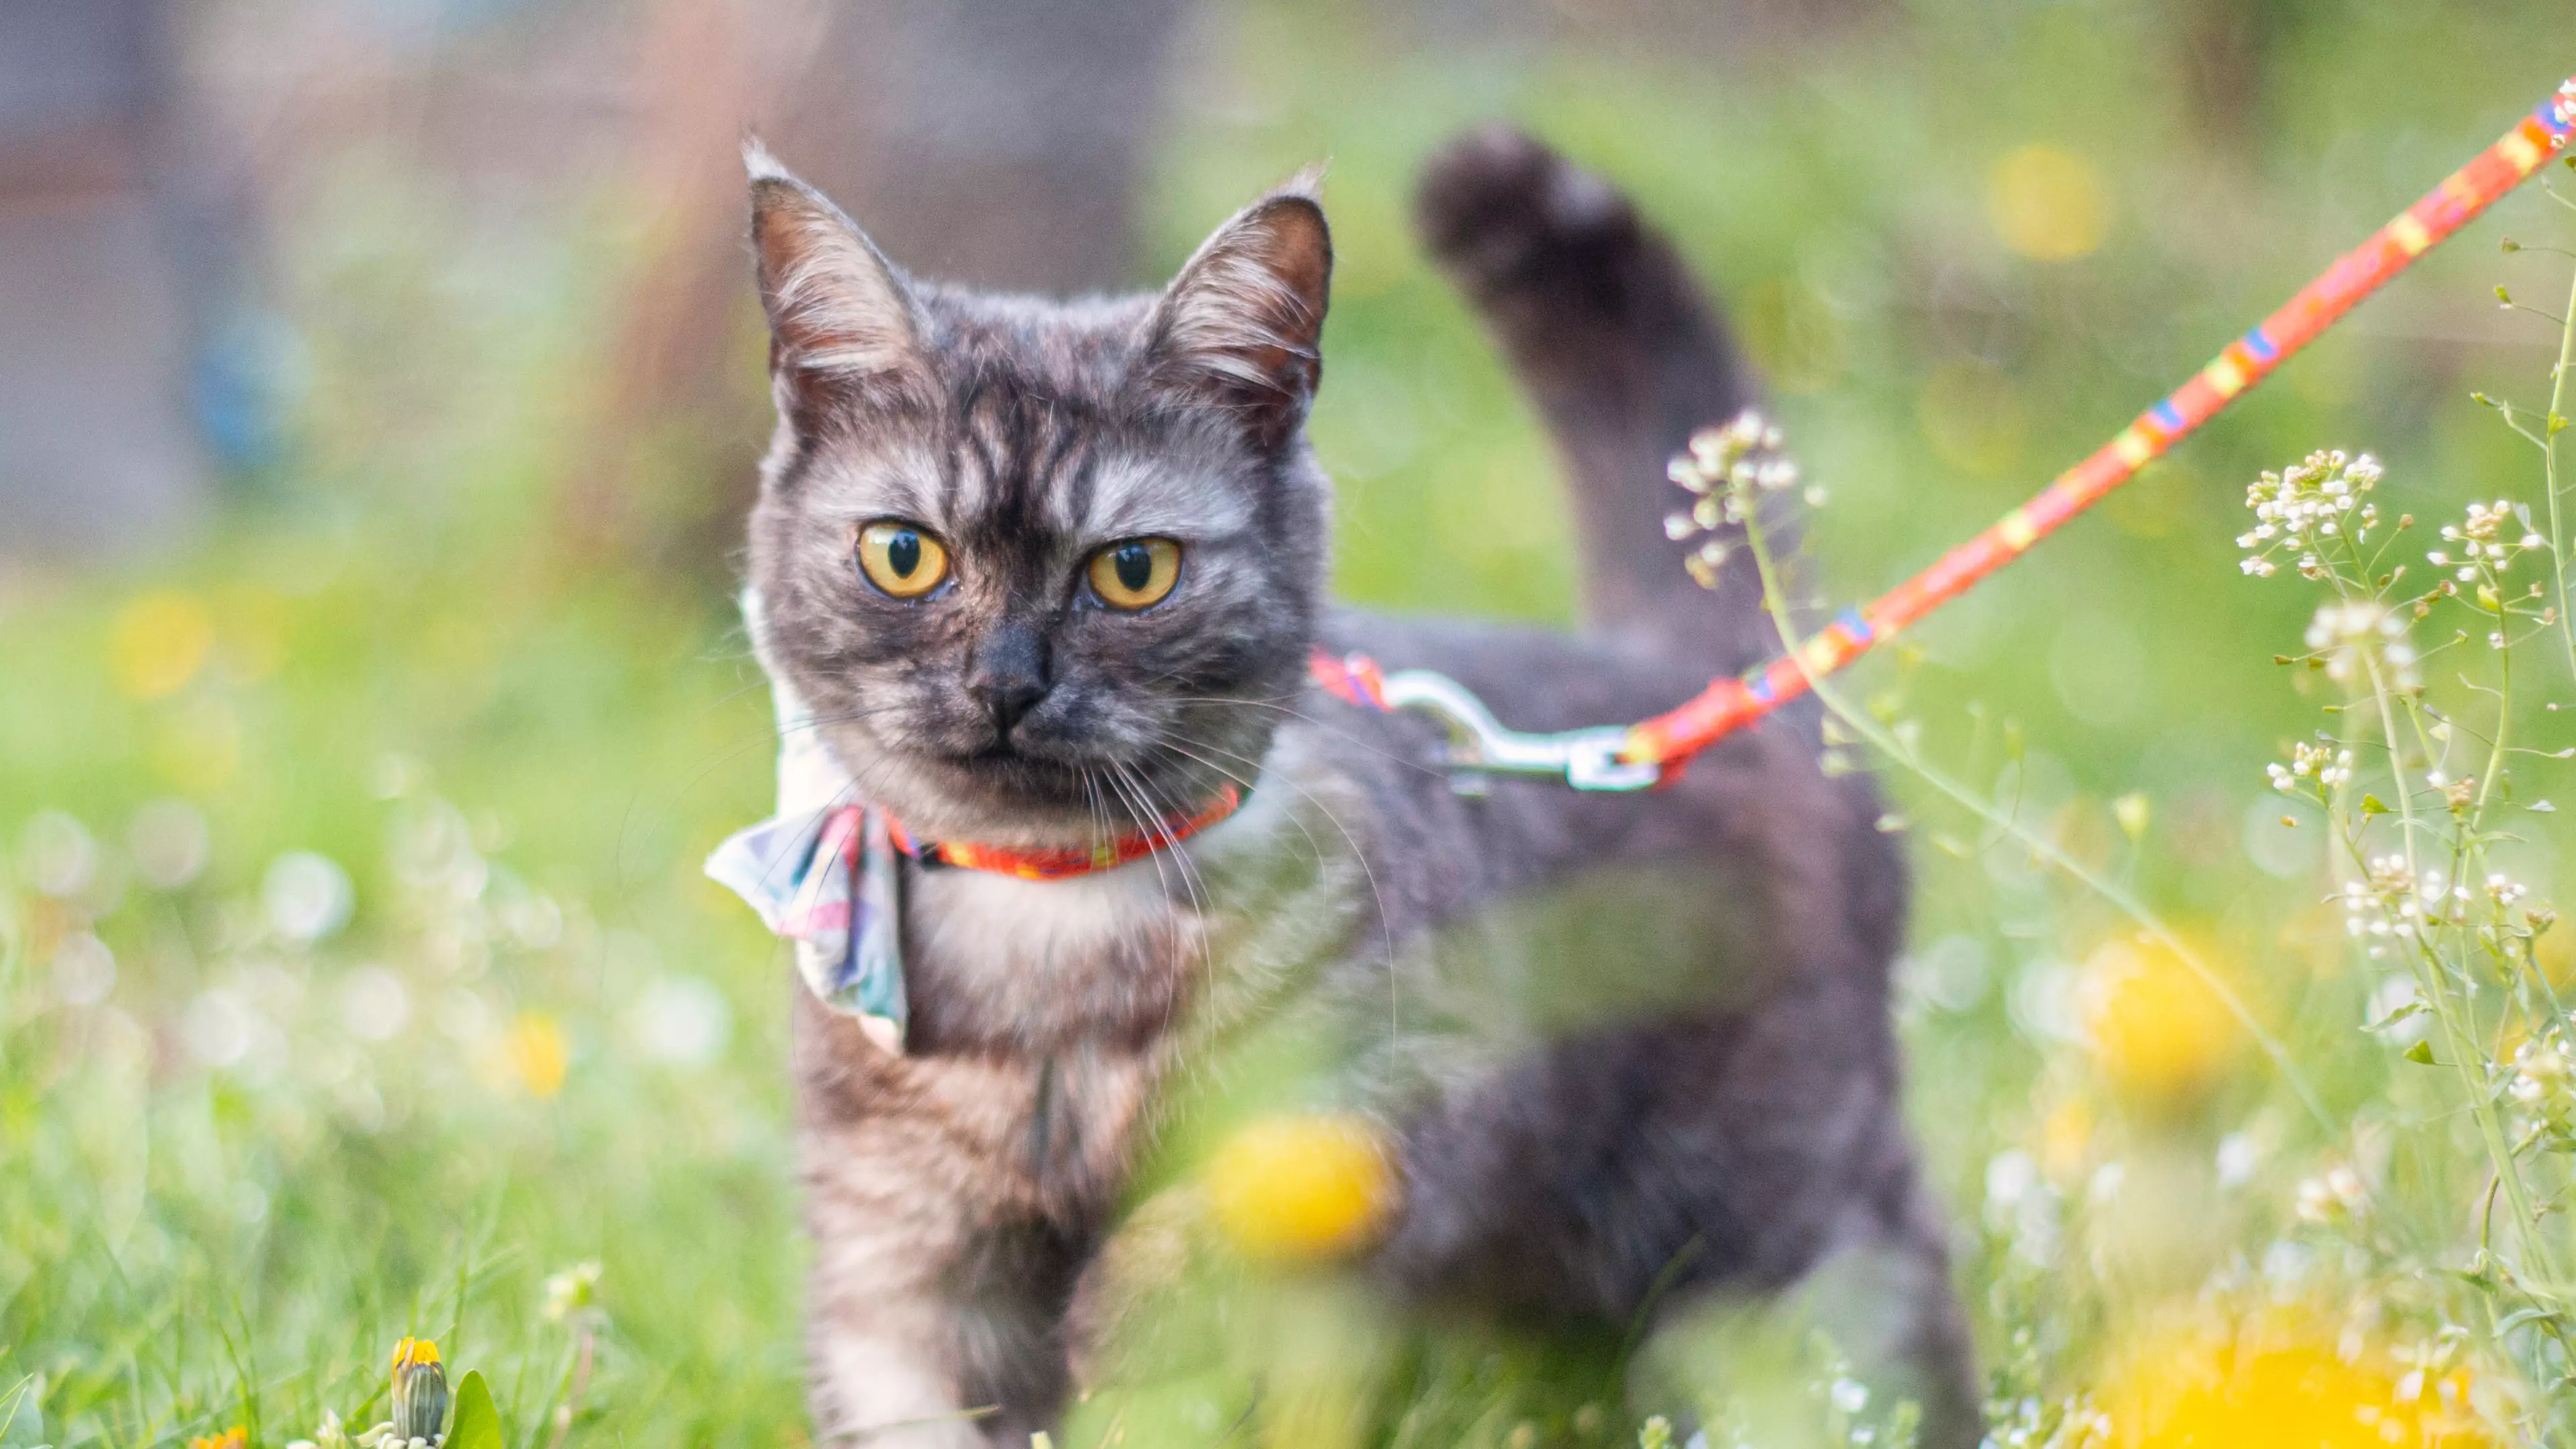 Cats Could Actually Enjoy Being Walked As Much As Dogs, Expert Claims